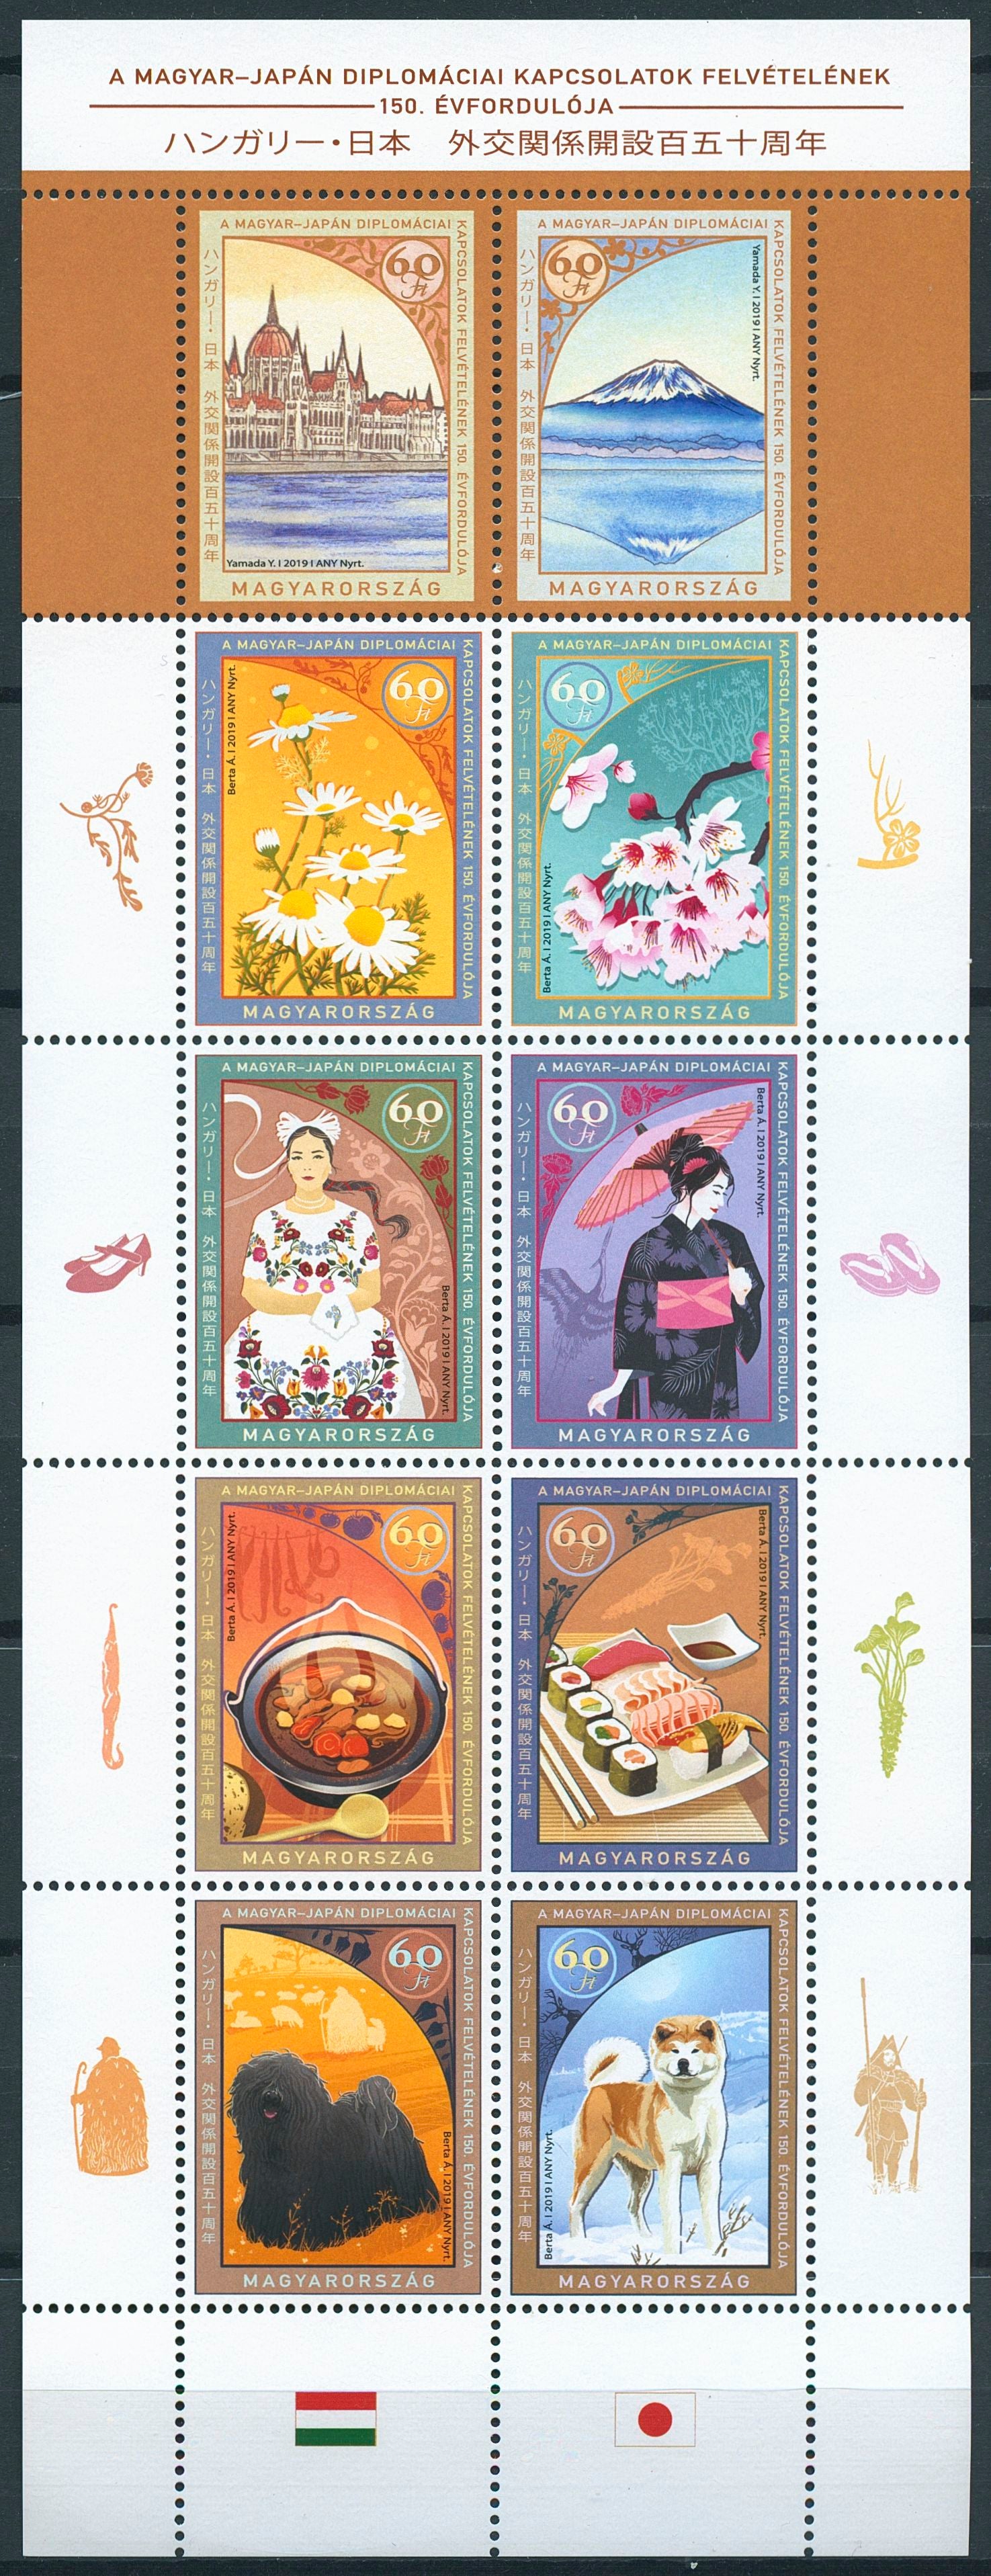 Hungary Art Dogs Flowers Gastronomy Stamps 2019 MNH Dipl Relations Japan 10v M/S